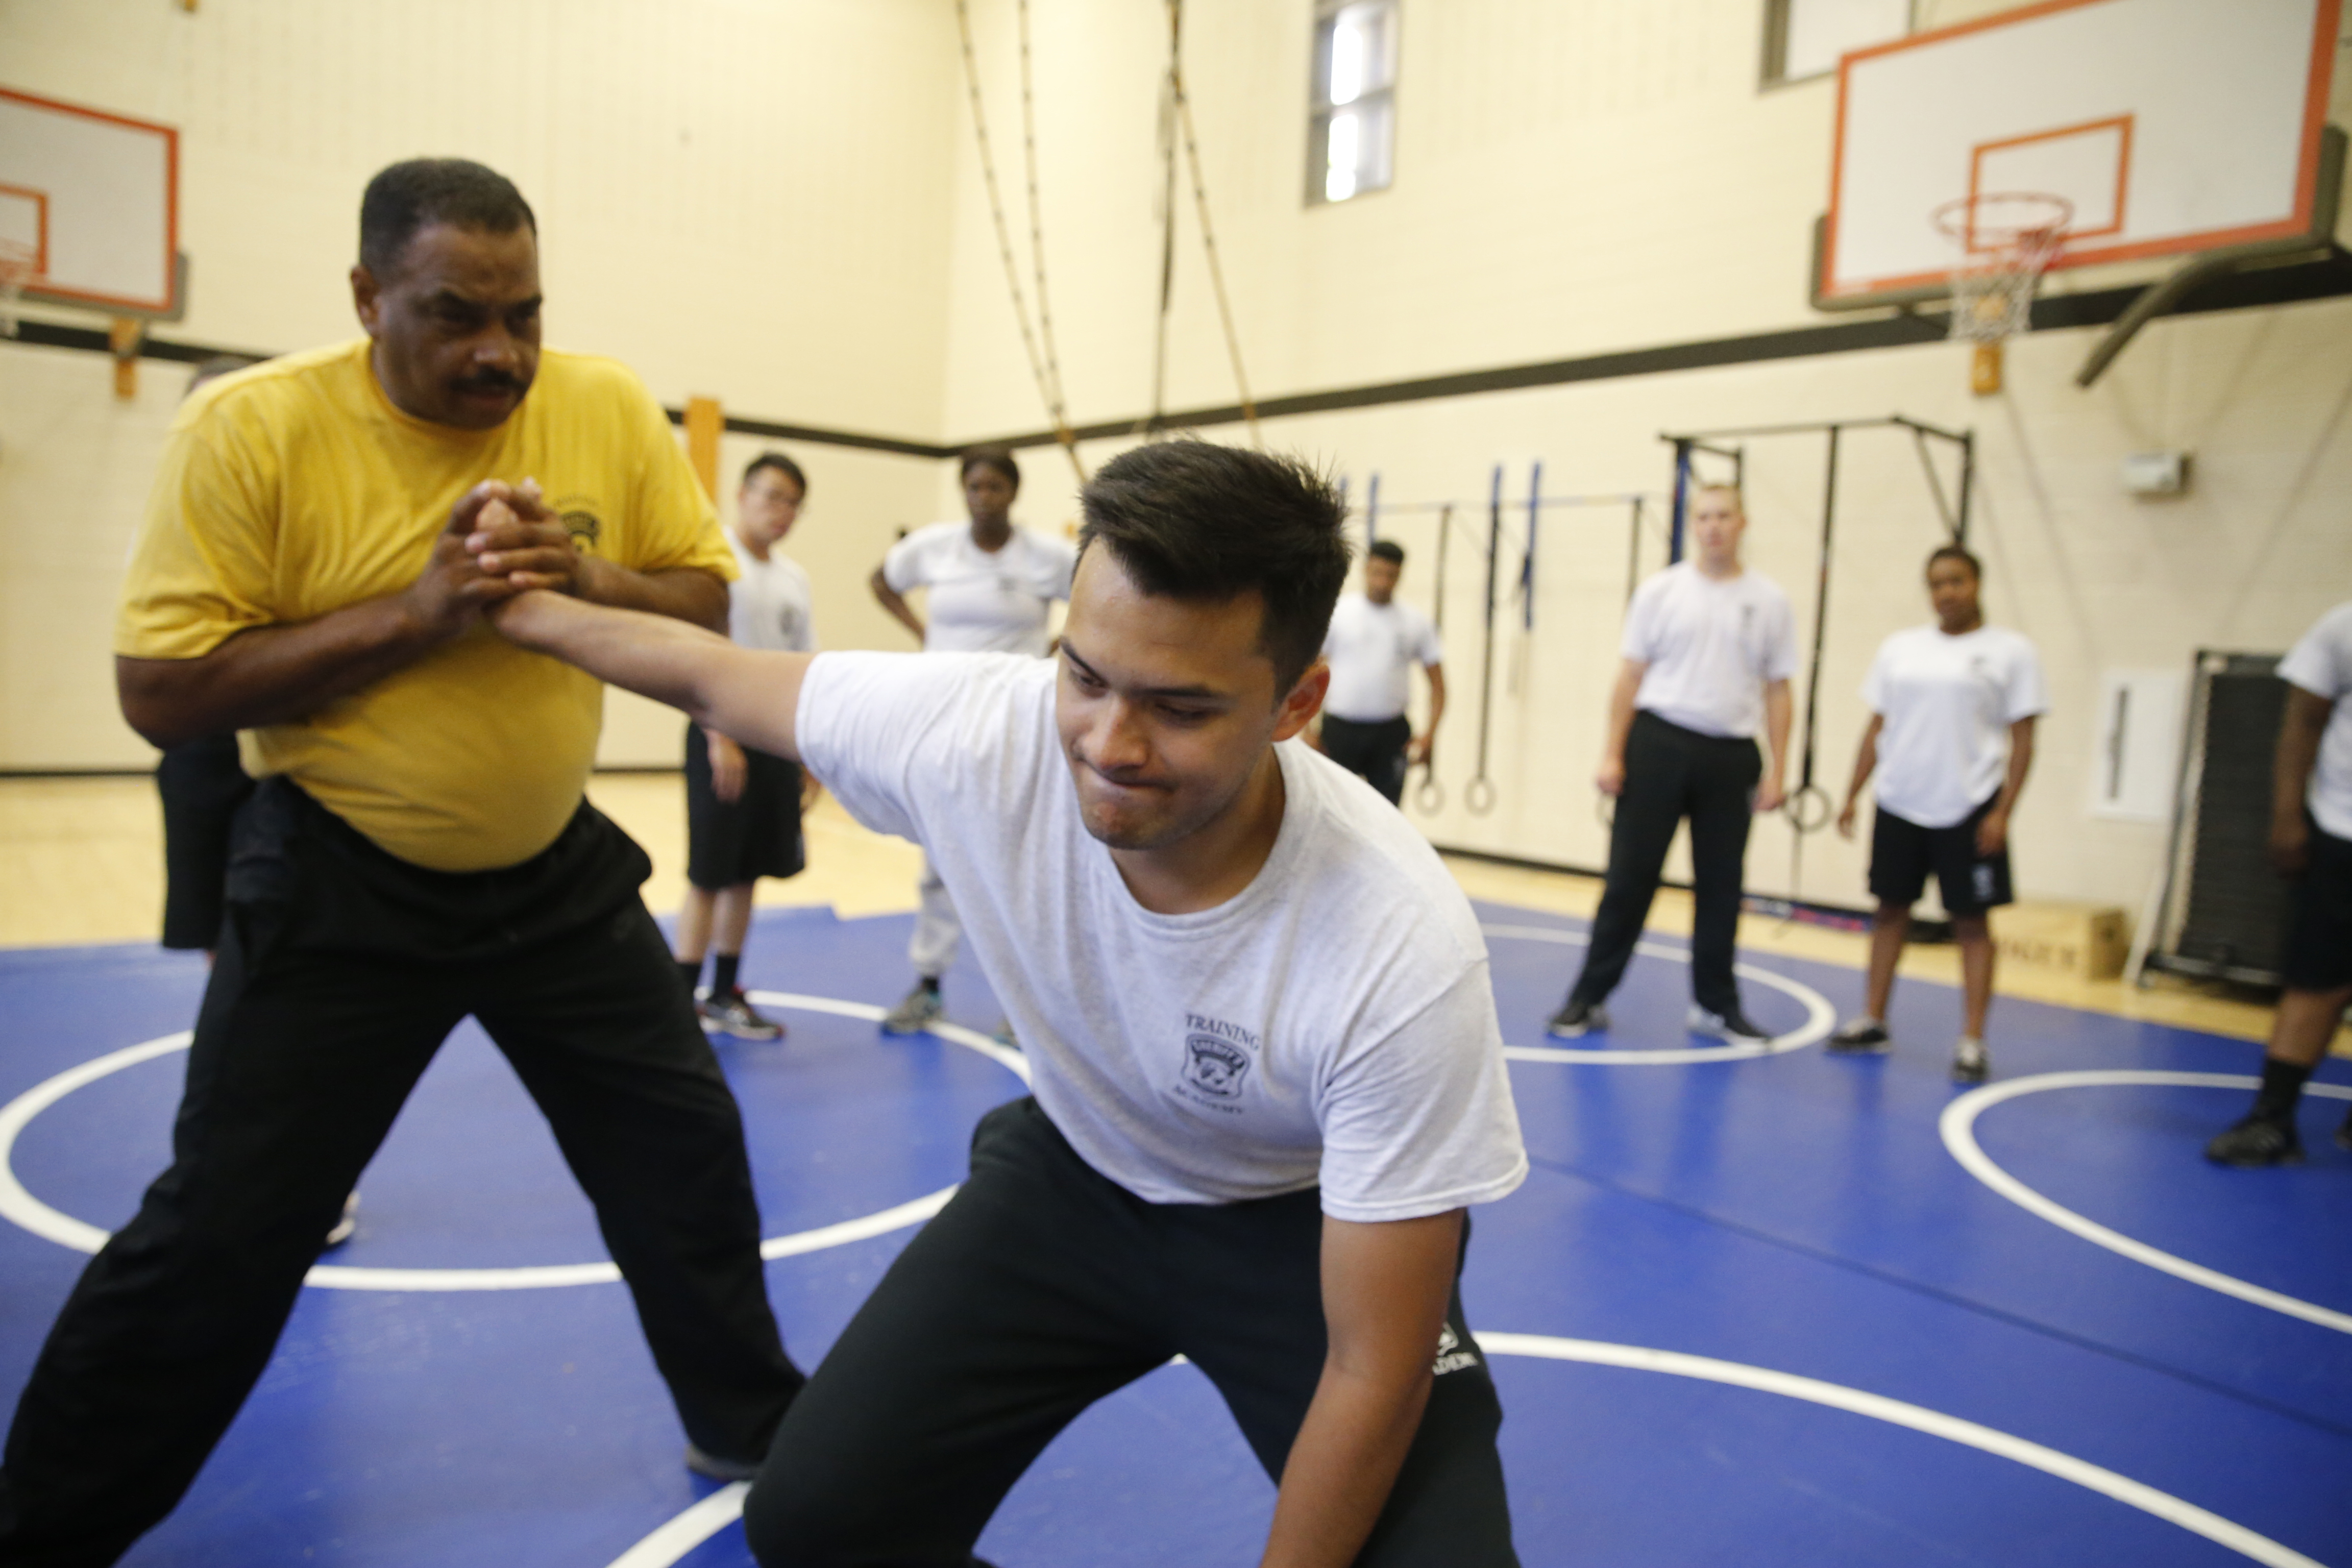 Academy recruit, Agustin Hussain, right, is subdued by Sergeant David Turner, left, during a course on the the finer points of hand-to-hand defensive techniques on July 13.